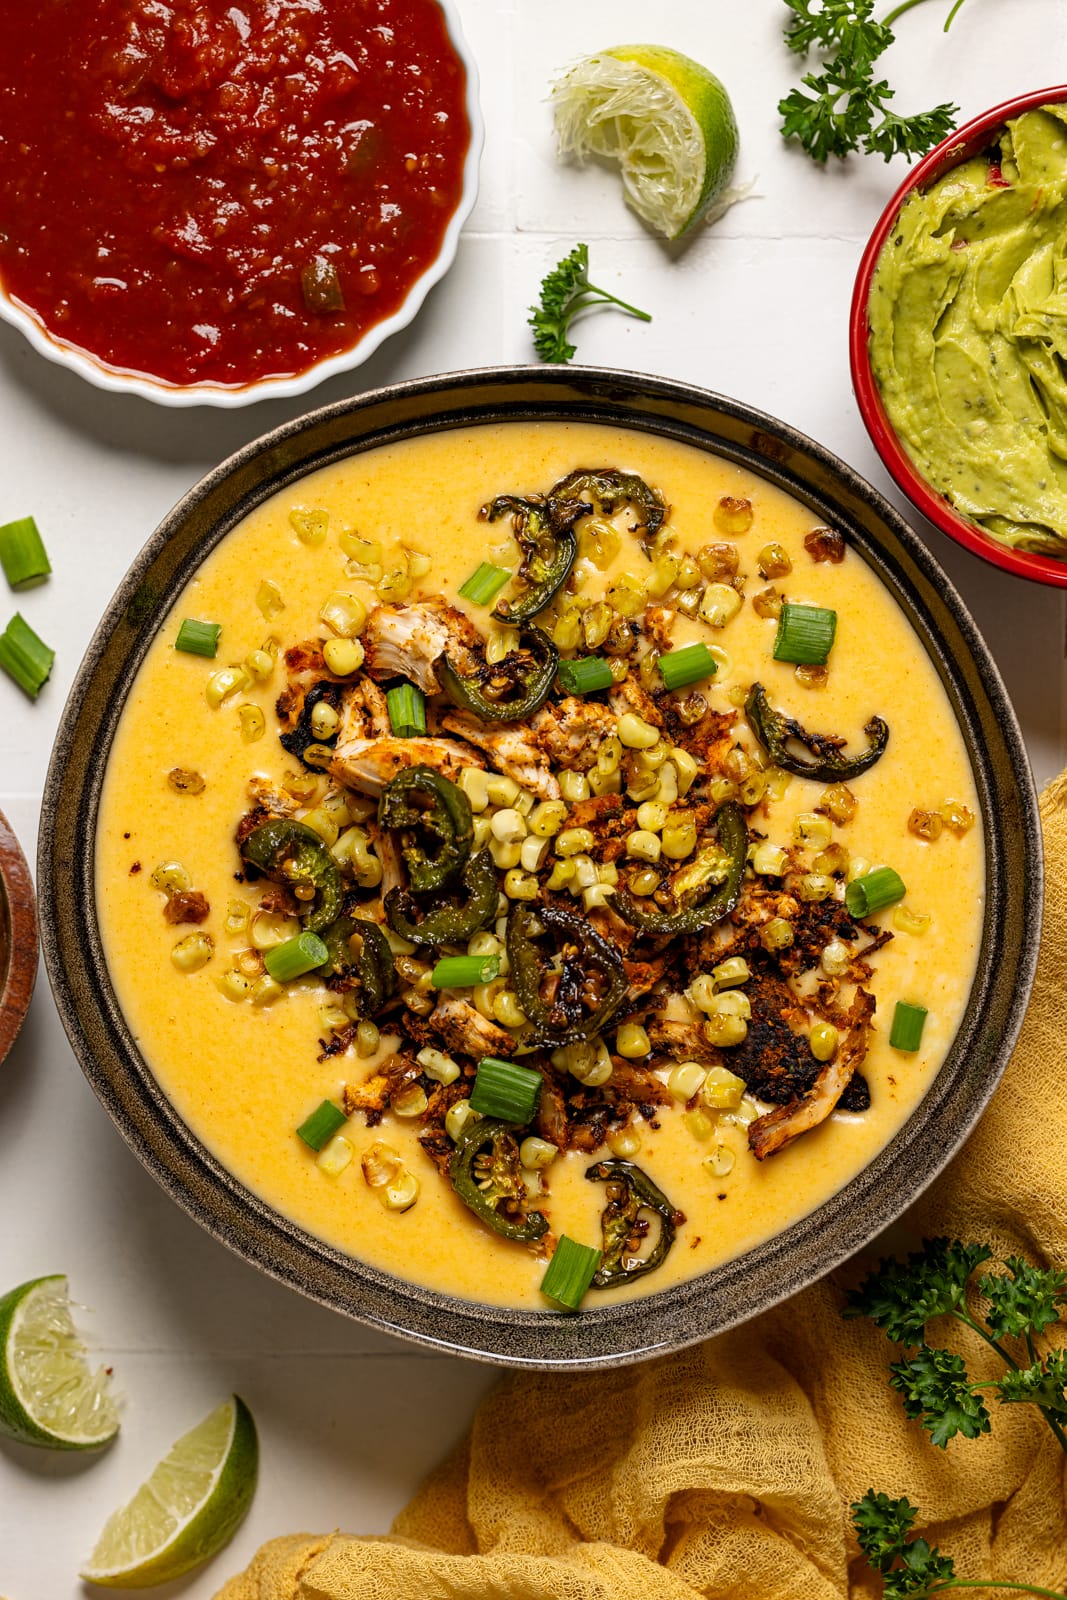 Queso dip with toppings and salsa, guacamole, and lime wedges.